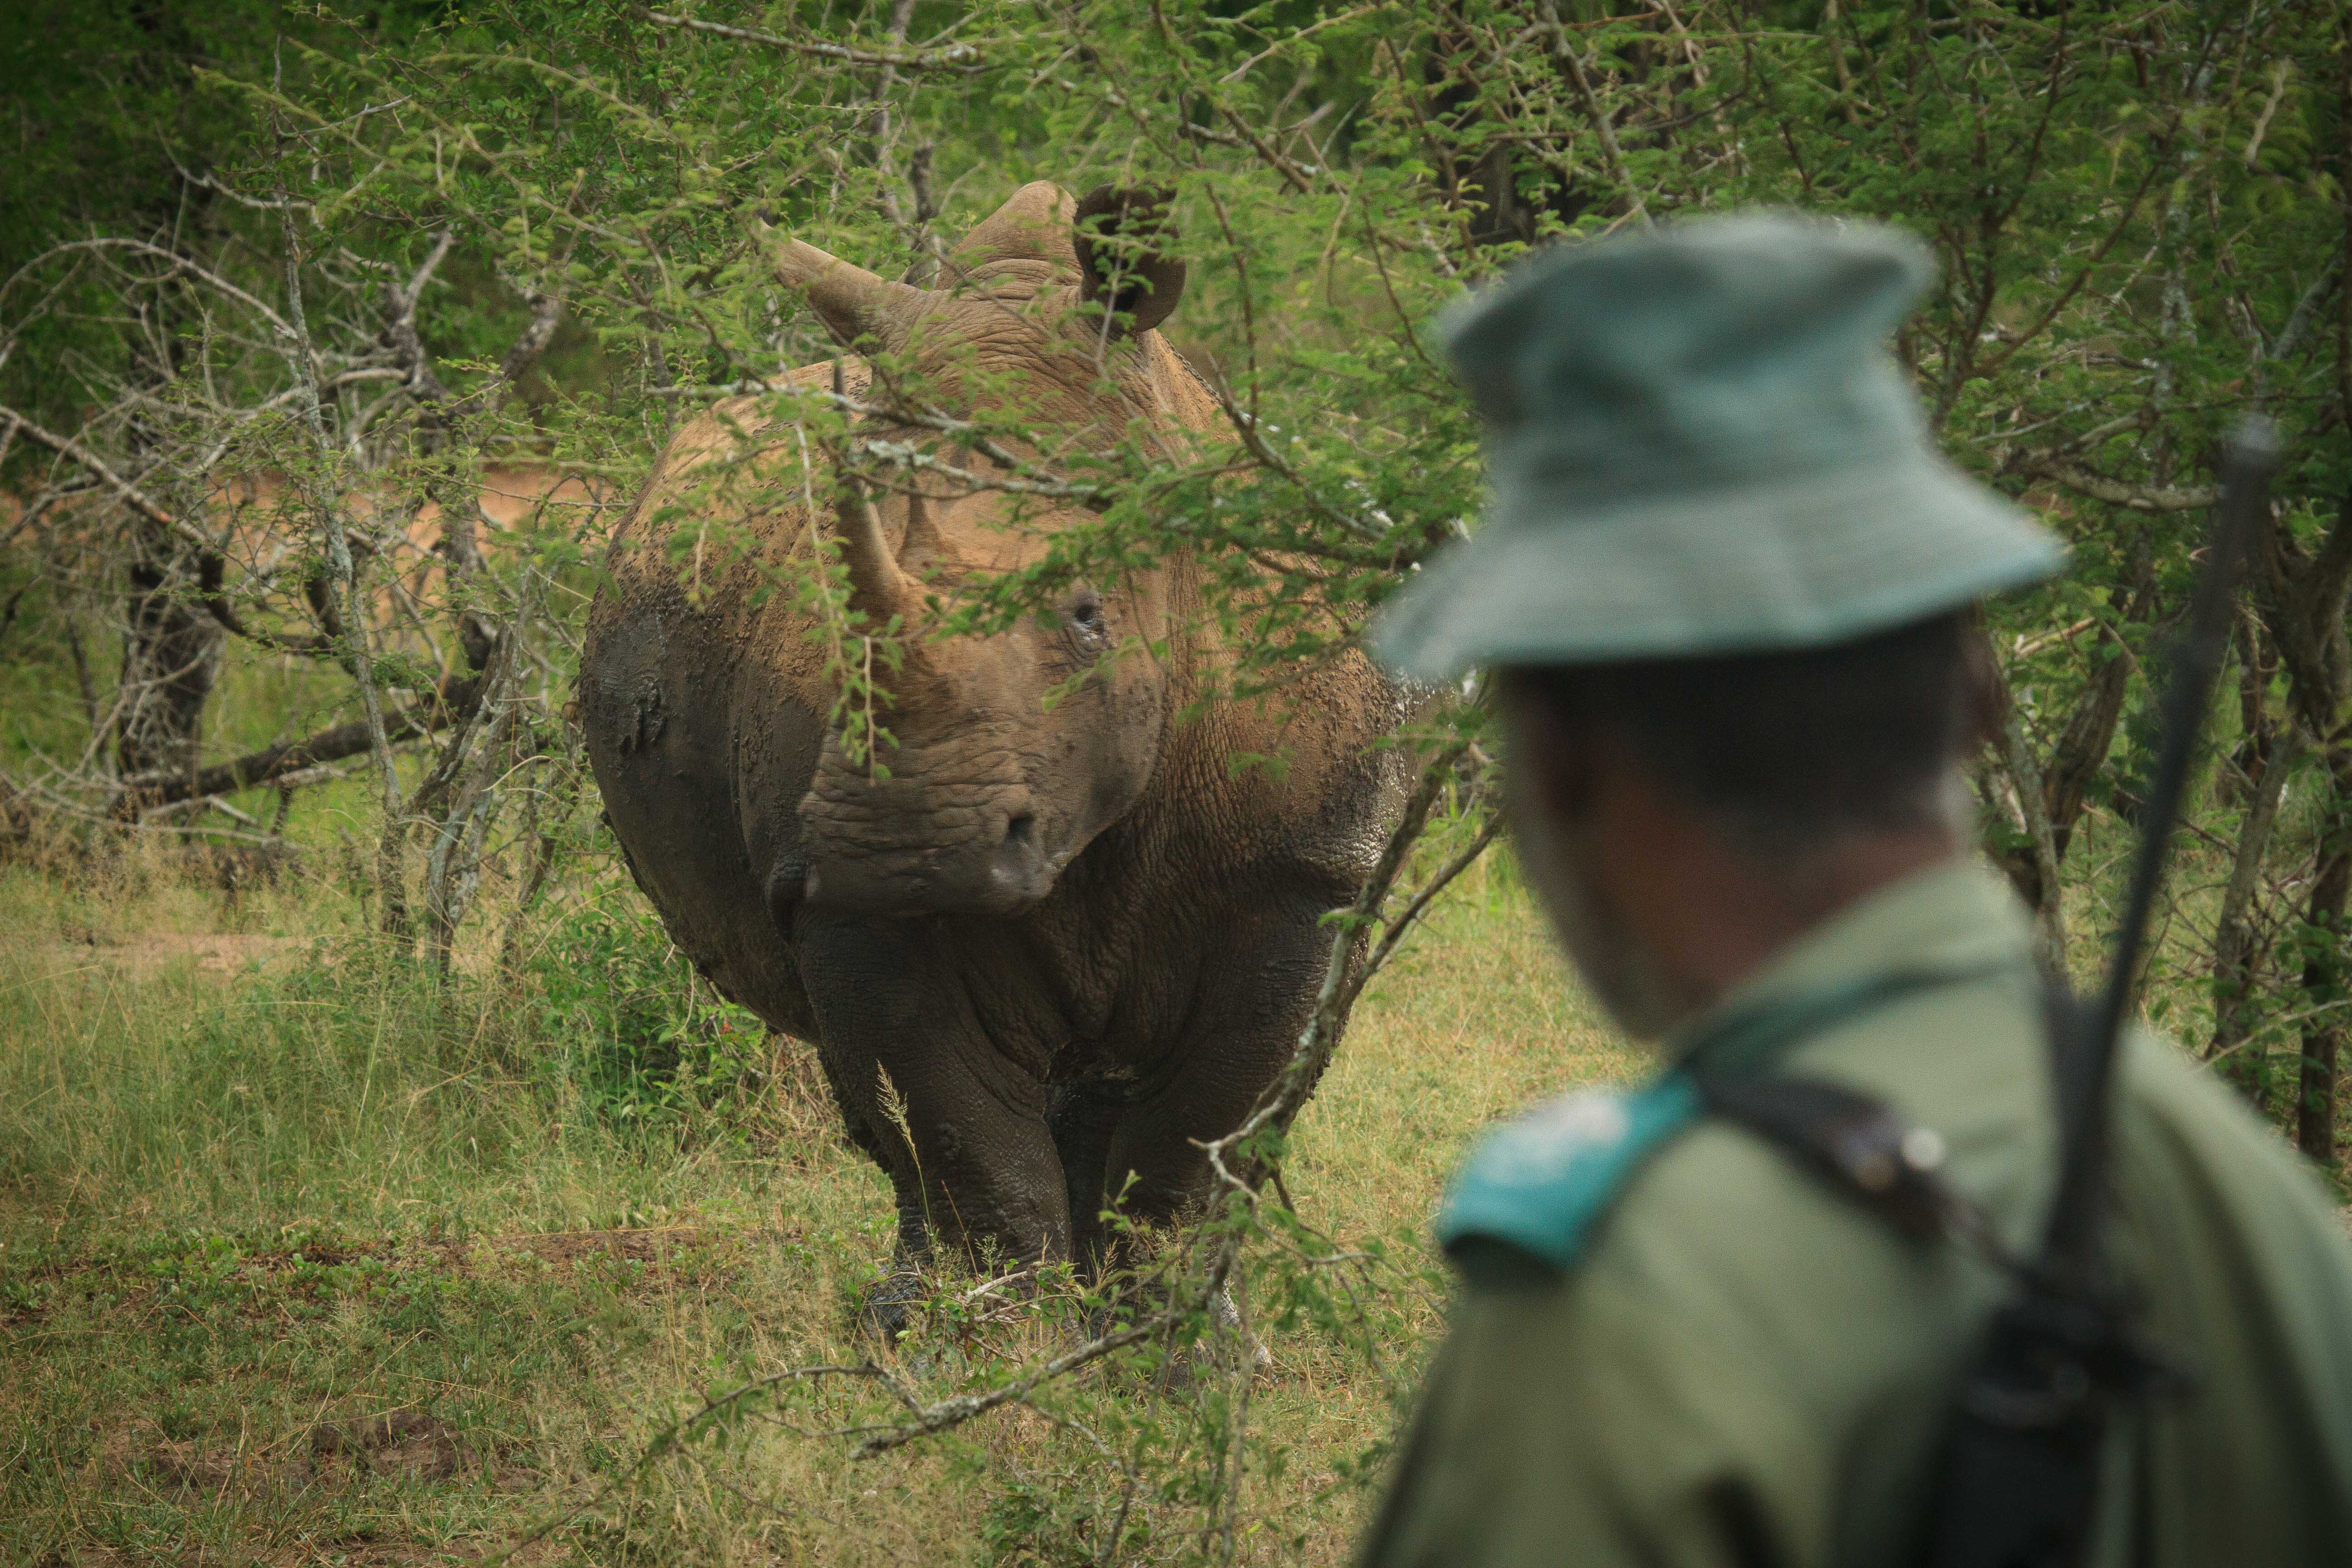 A field ranger keeps a close watch over a wild rhino to which he has been assigned in an African Game Park.